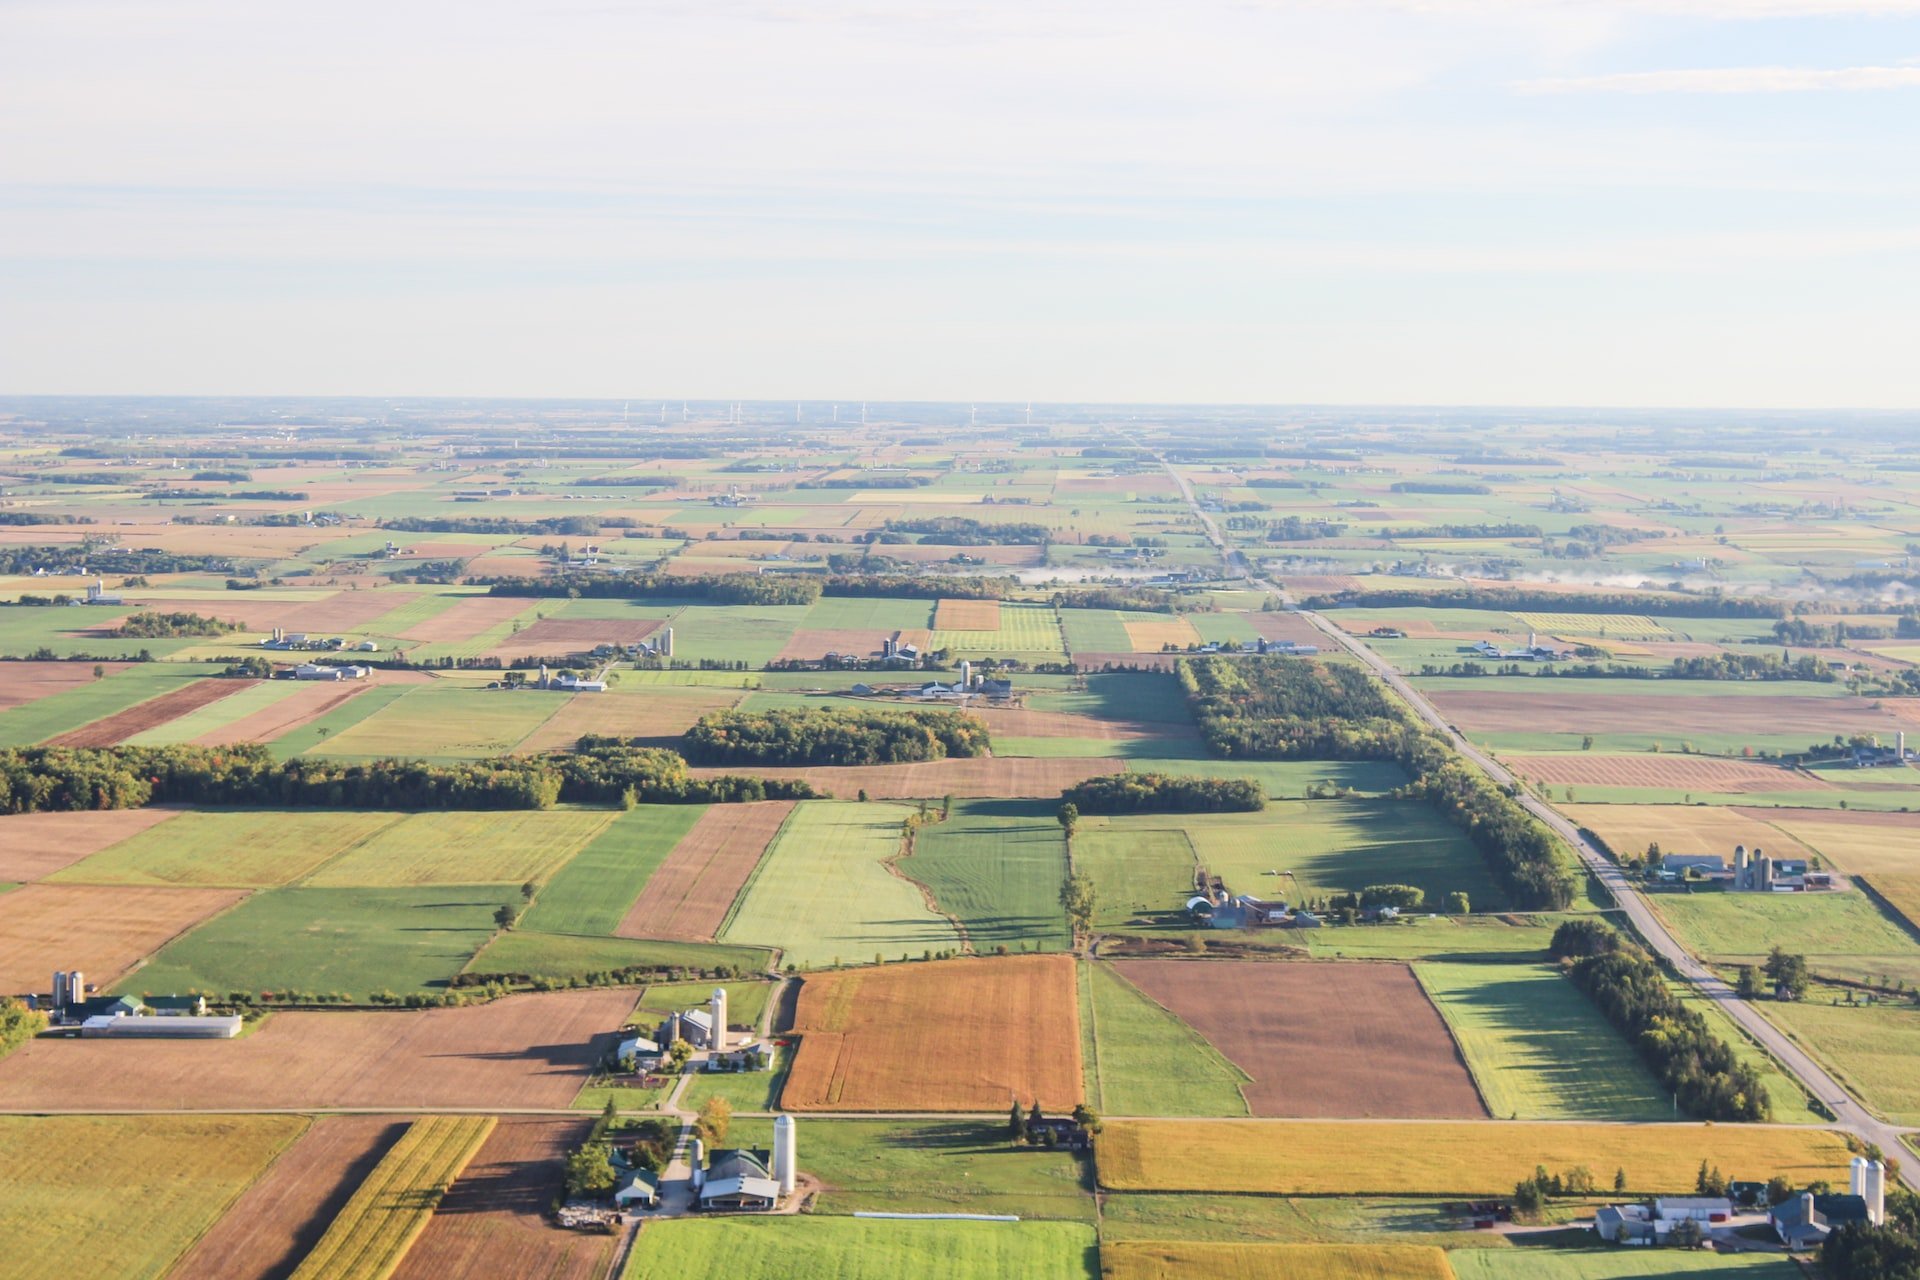 Depicts an arial view of many farms. Used as a cover image for a landing page for farmland as an alternative investment.